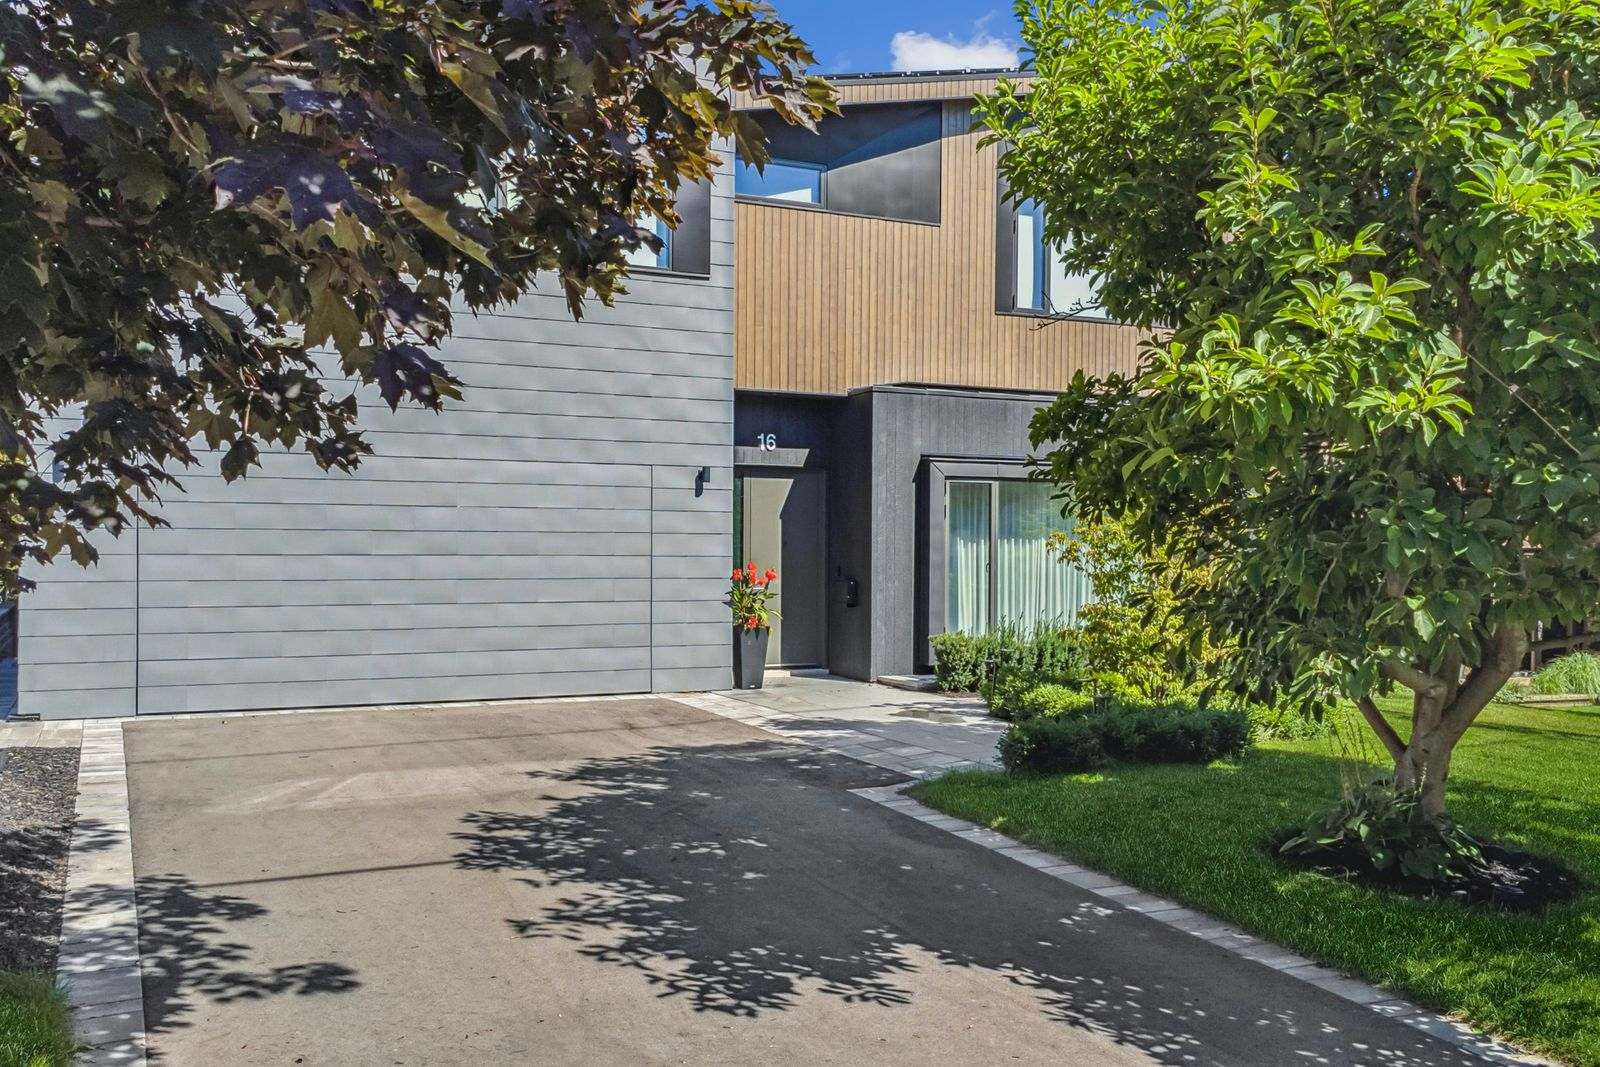 zinc modern cladding architectural designed home with trees obstructing view in toronto home renovation